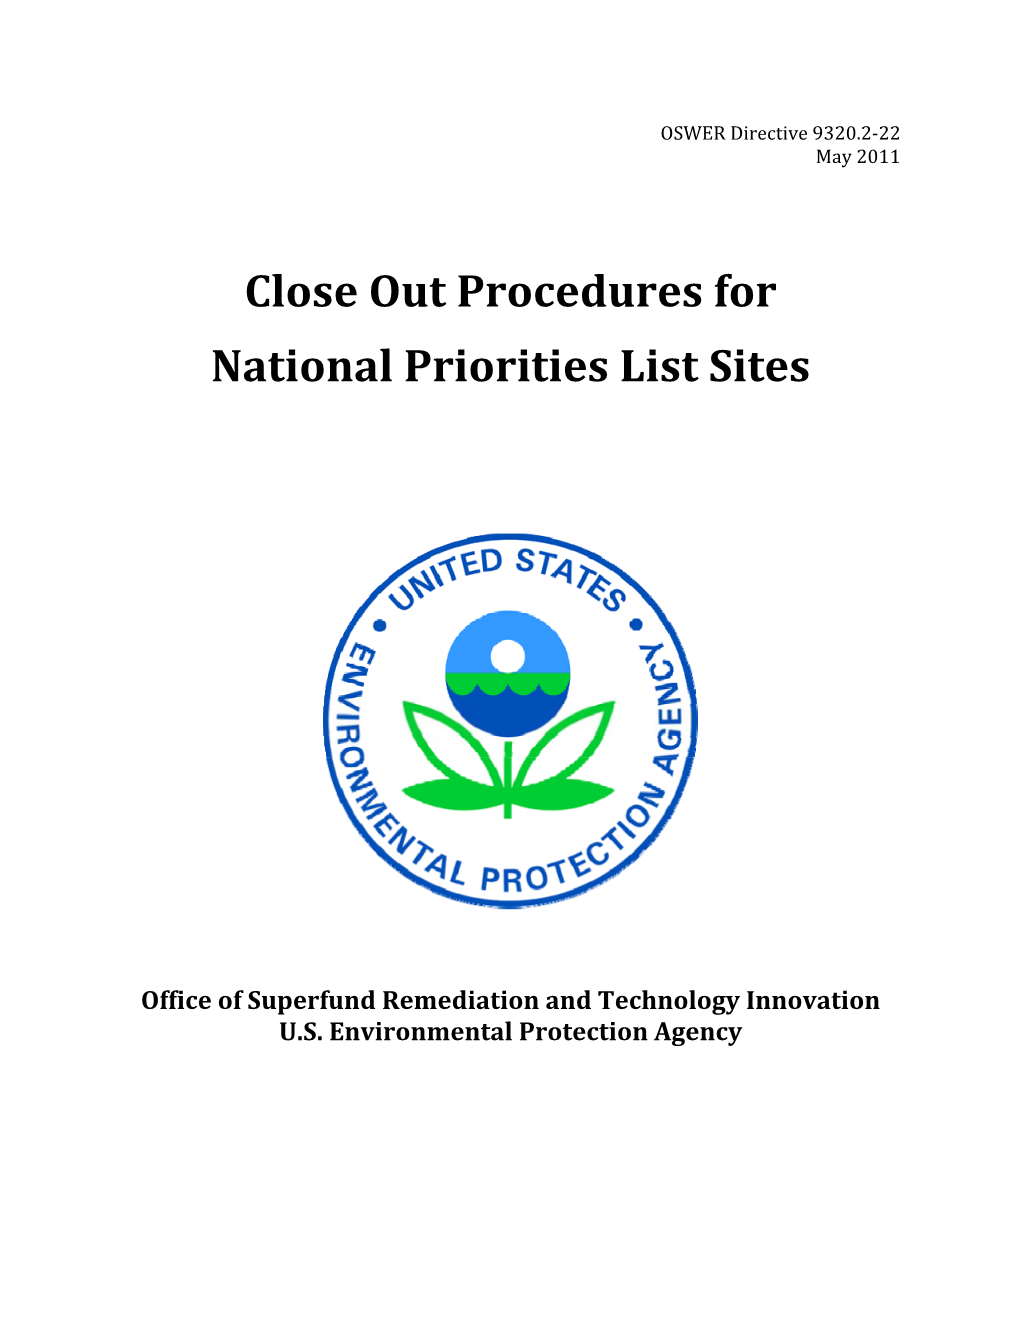 Close out Procedures for National Priorities List Sites